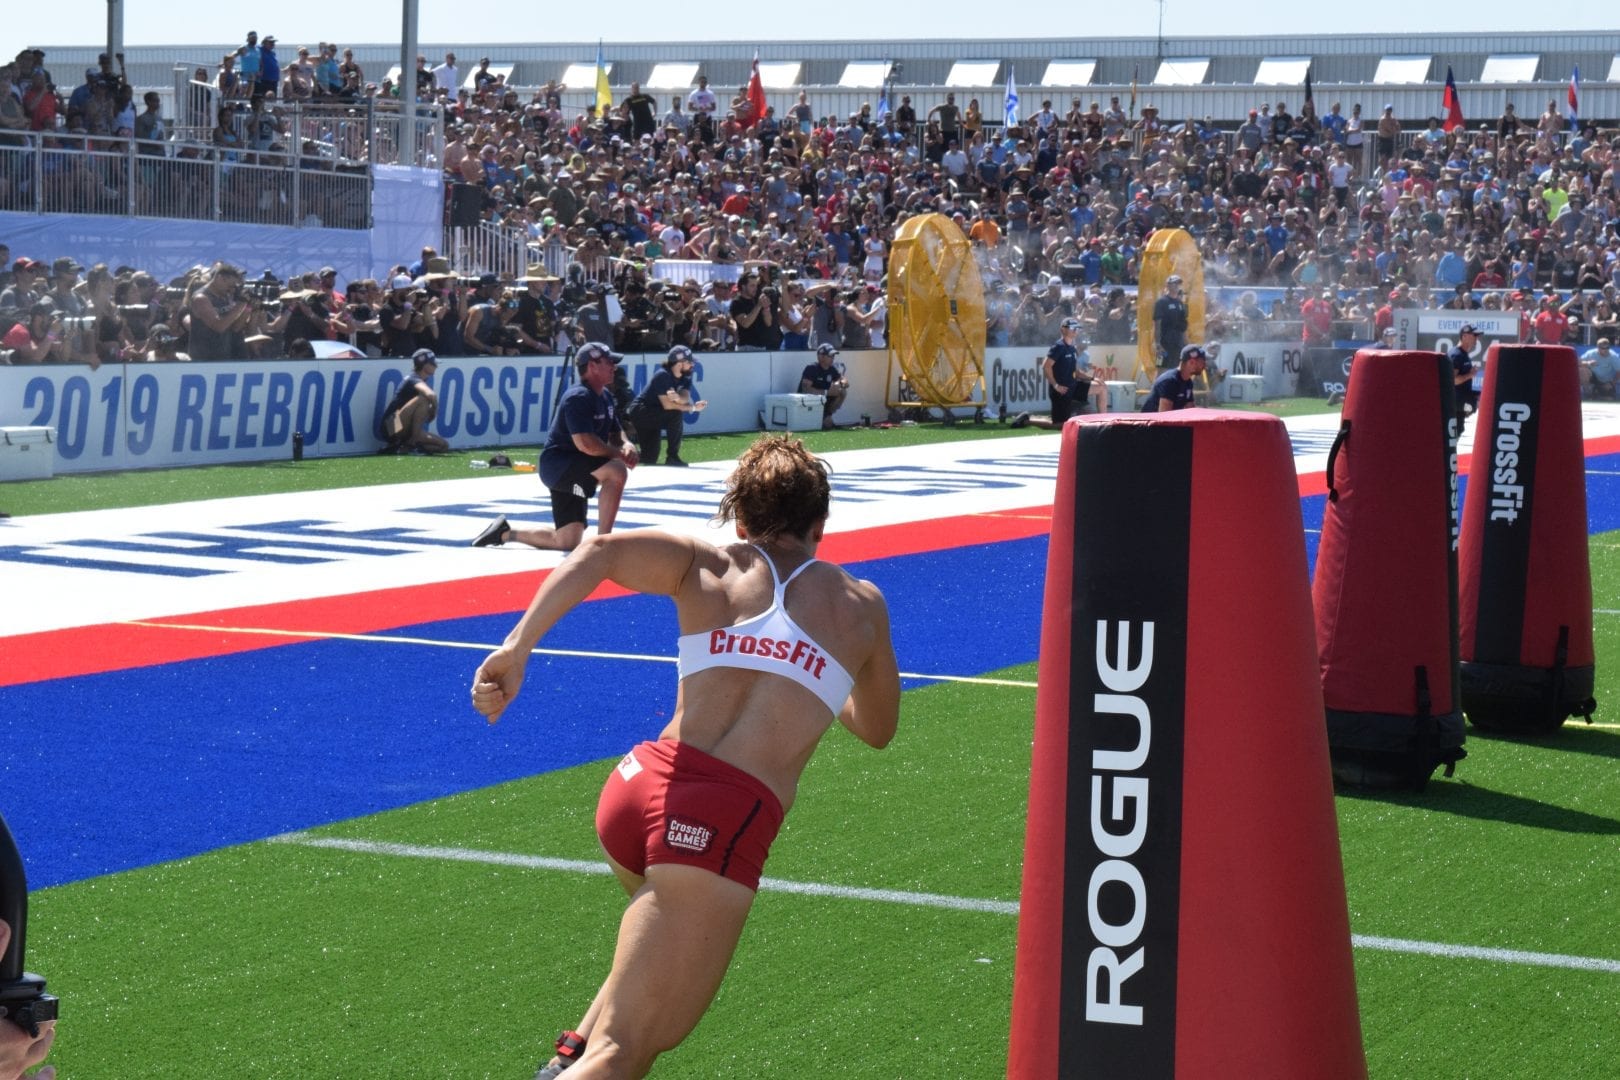 Tia-Clair Toomey of Australia competes in the Sprint event at the 2019 CrossFit Games